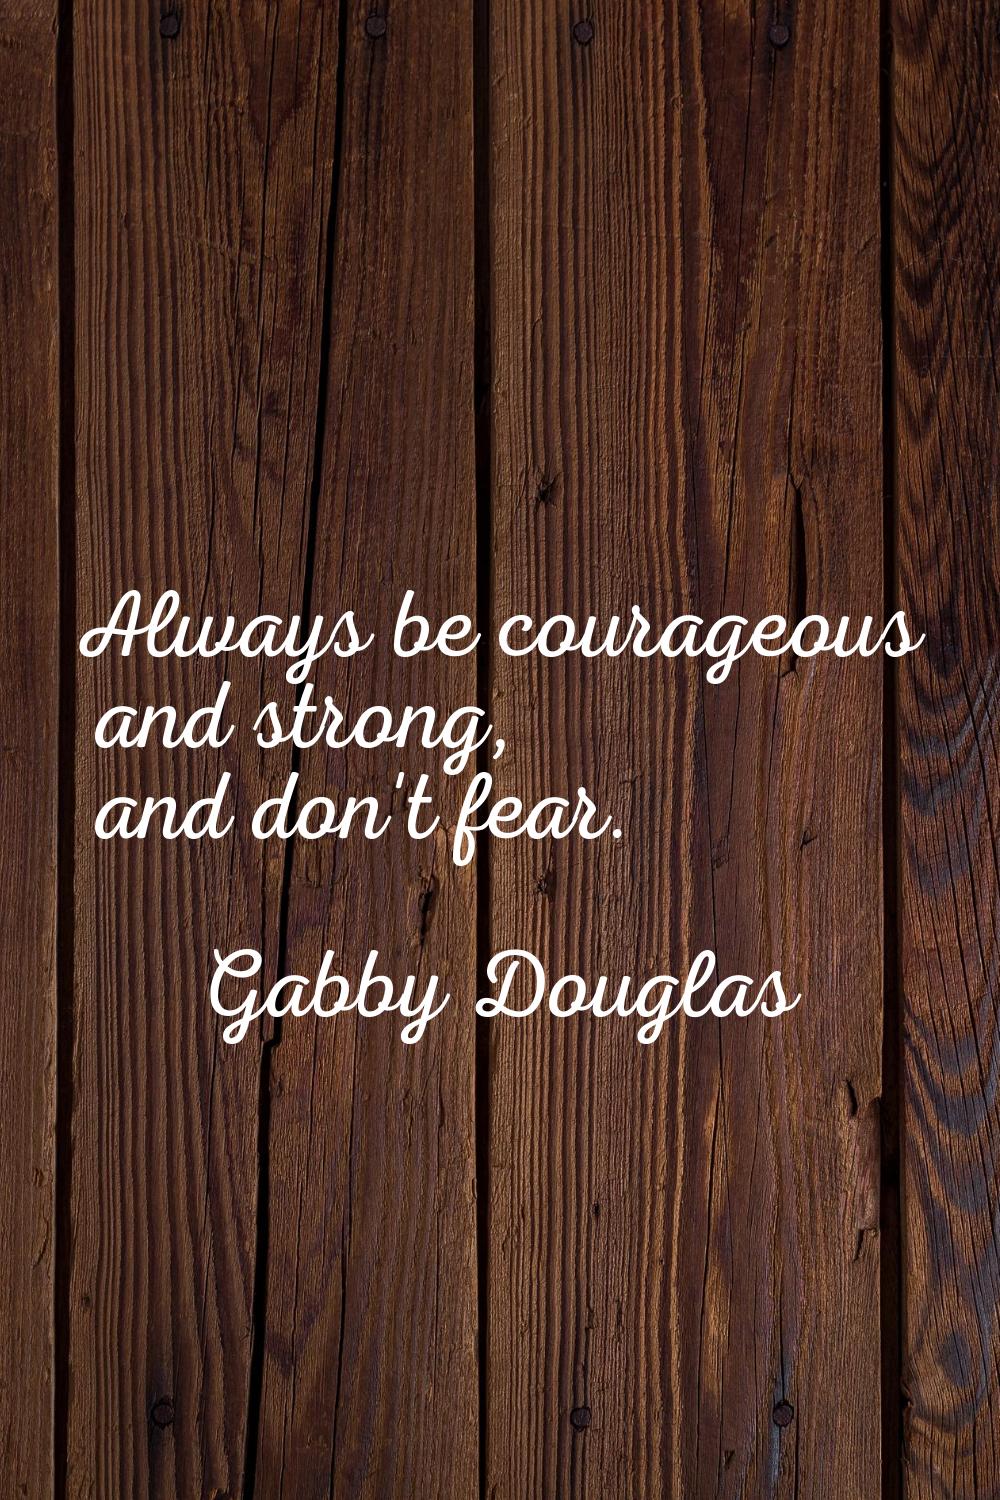 Always be courageous and strong, and don't fear.